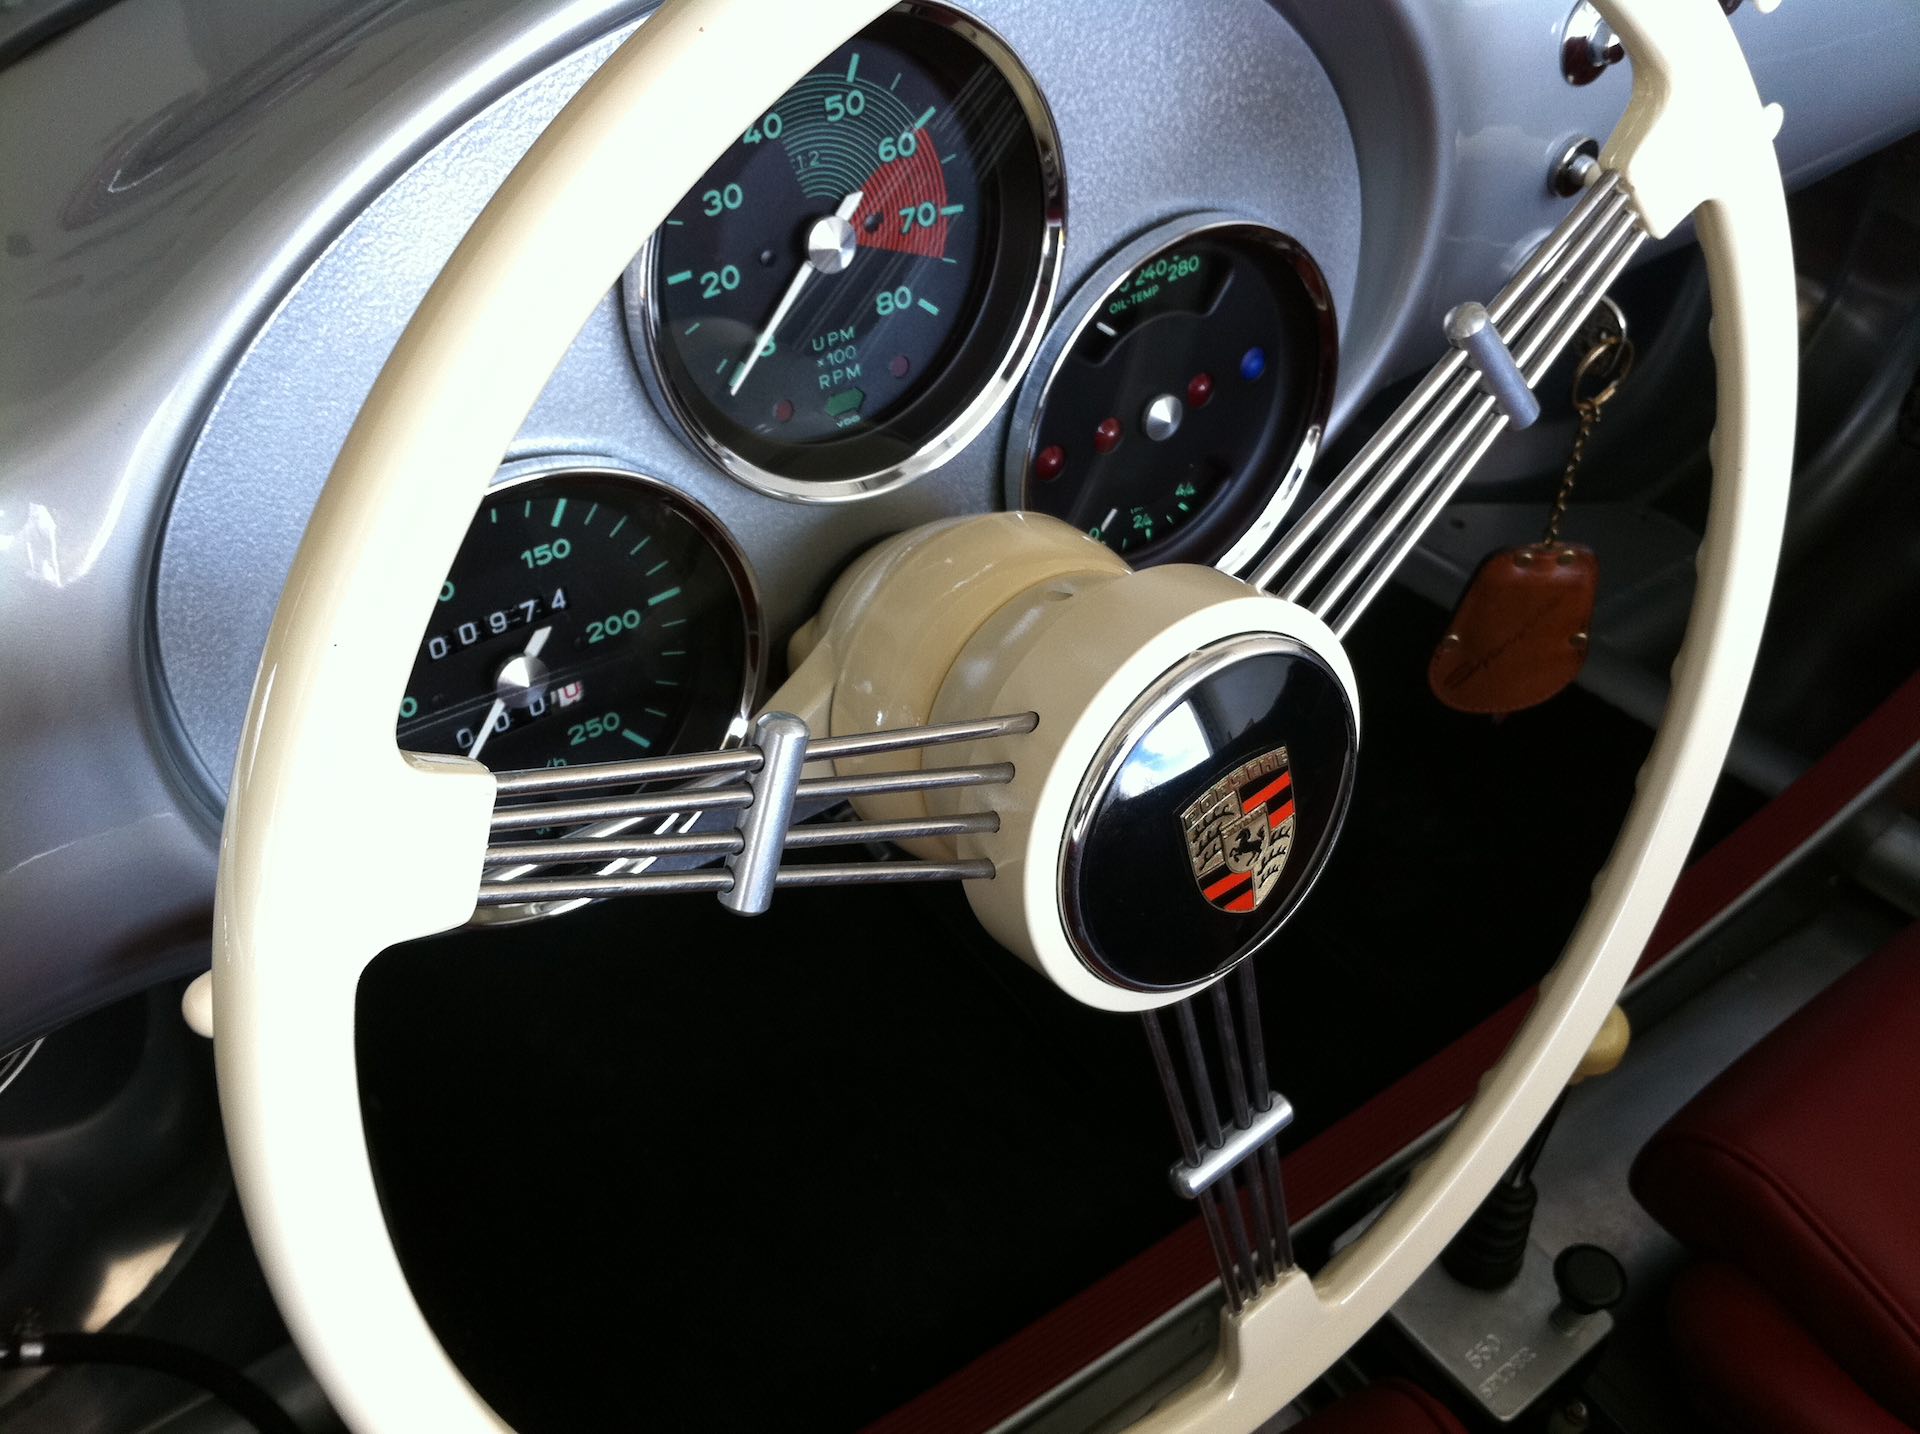 photo representing personal project: vintage sportscar instrument panel